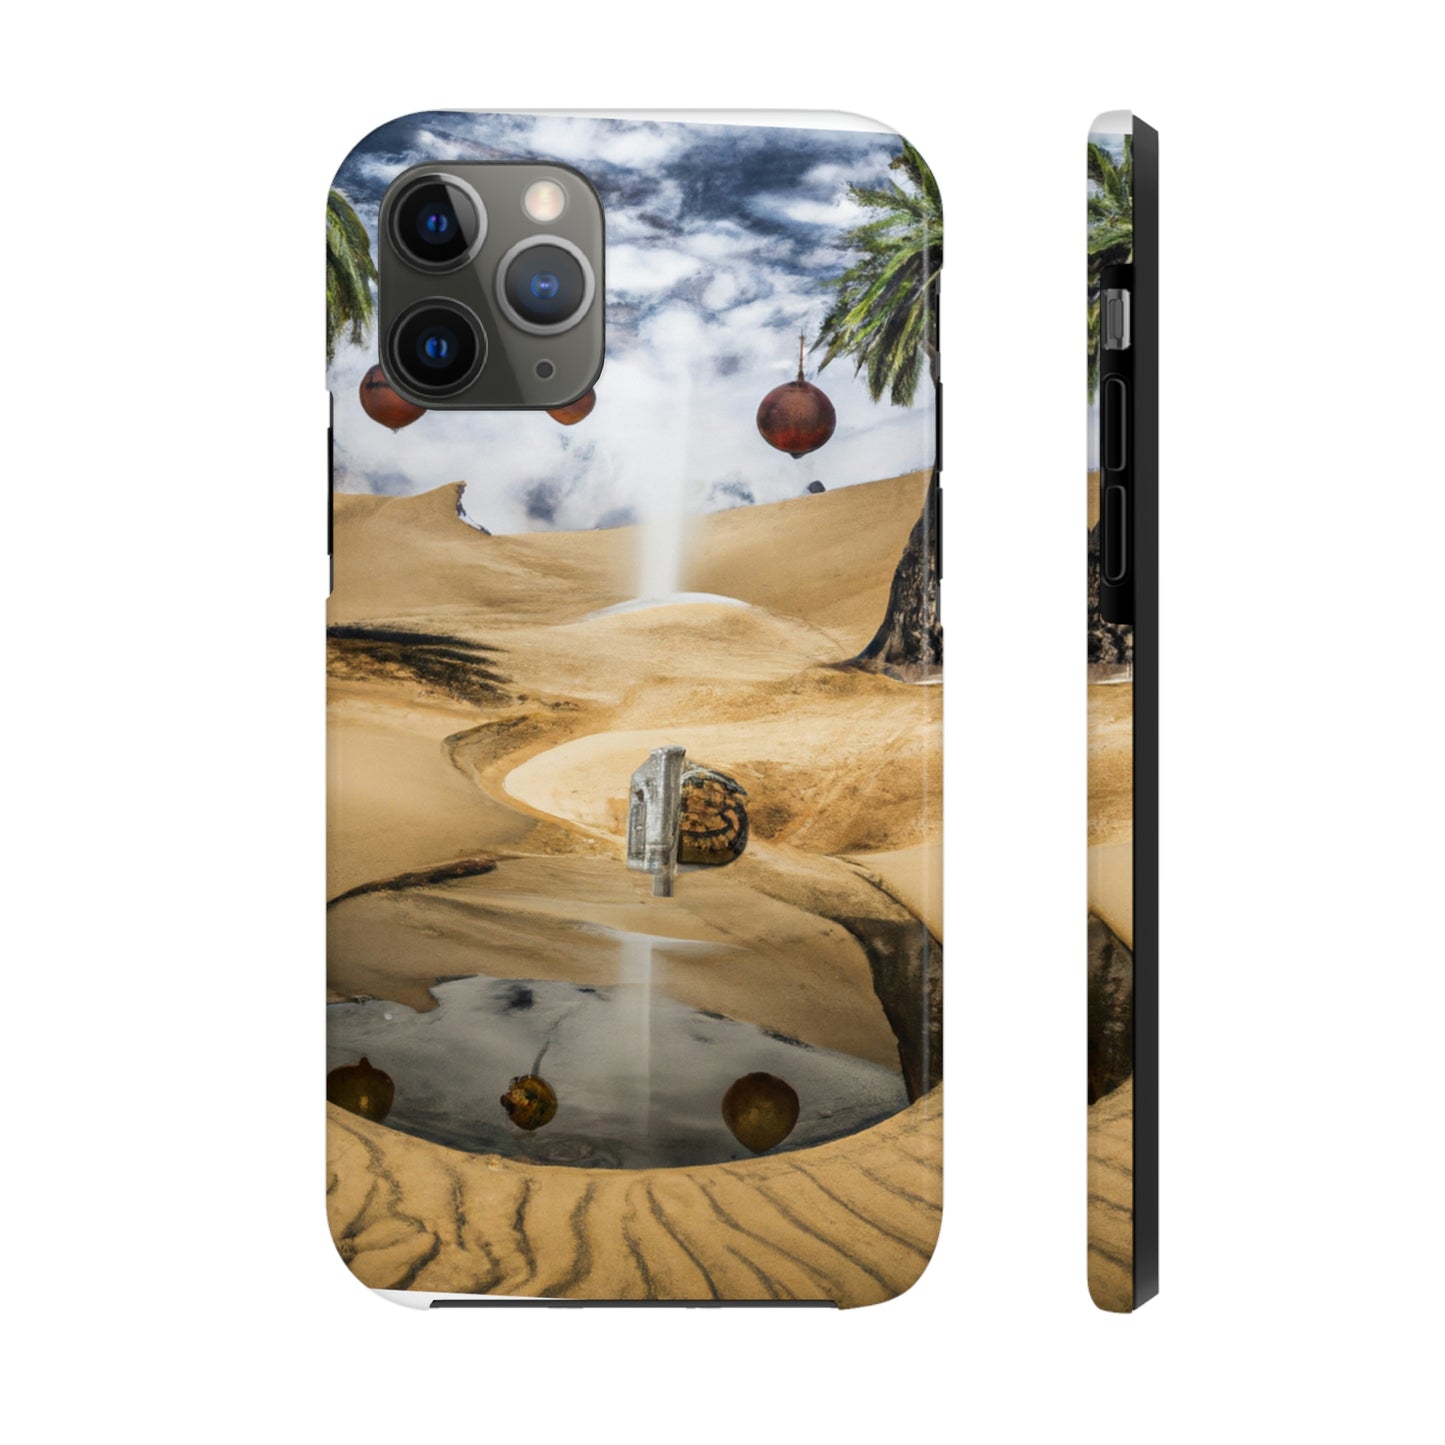 The Mirage of the Desert Sands - The Alien Tough Phone Cases